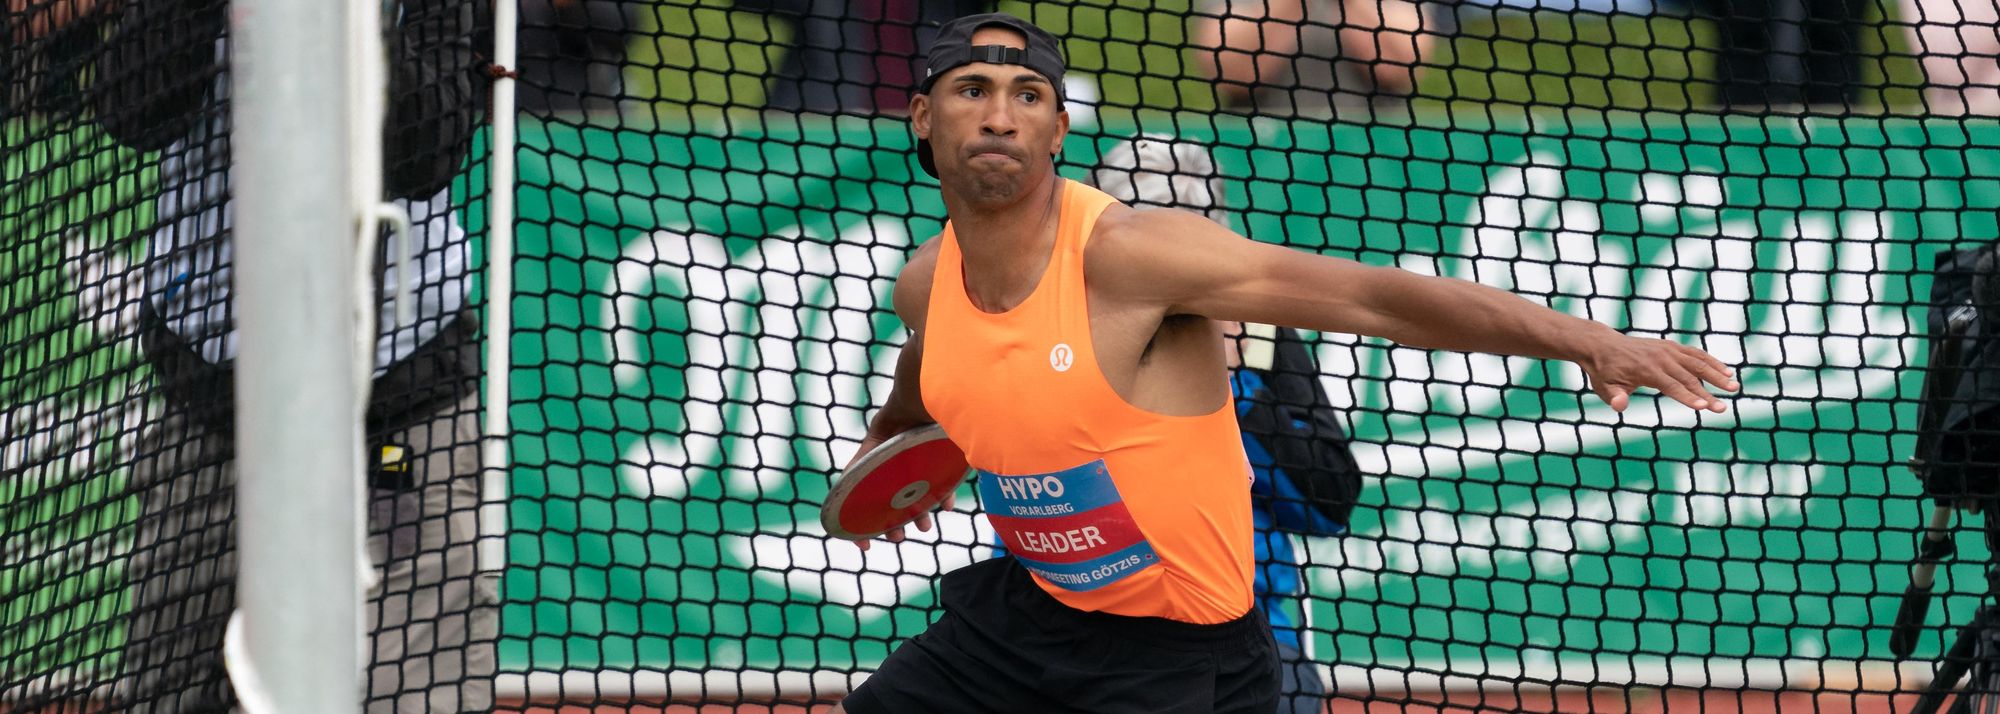 Olympic champion Damian Warner, Olympic silver medallist Anouk Vetter and their fellow global medallists Ashley Moloney, Emma Oosterwegel and Lindon Victor form part of the formidable fields set for the Hypomeeting